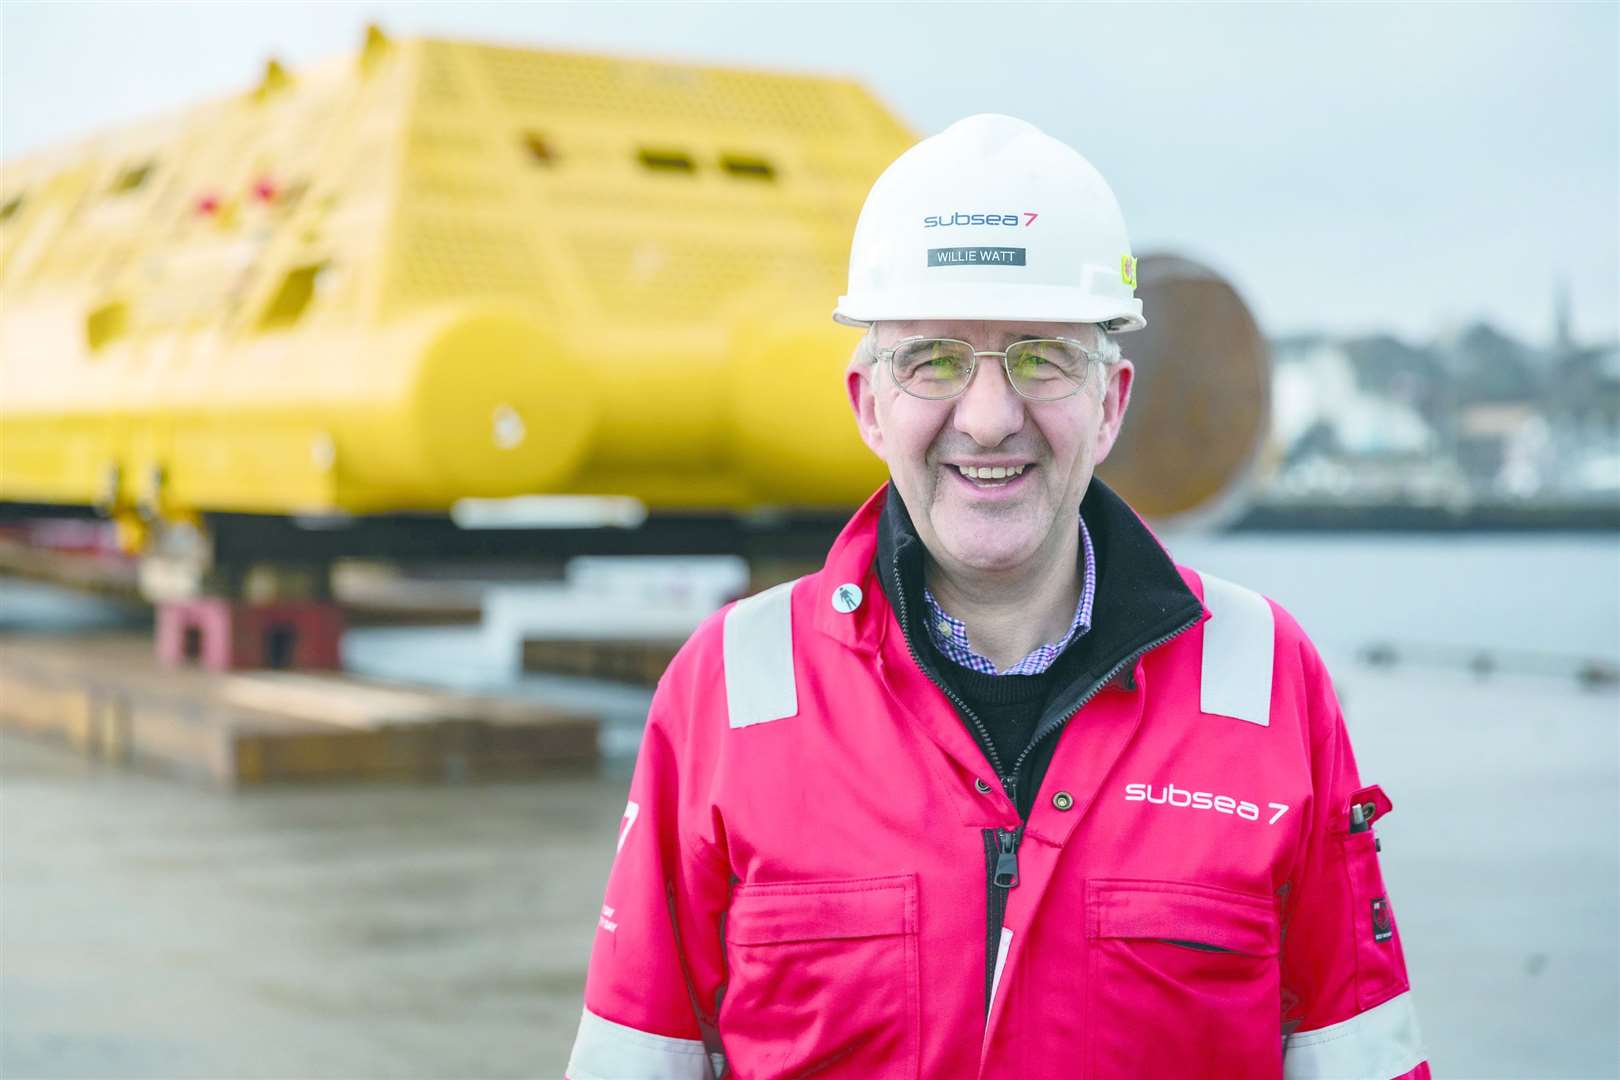 Willie Watt talked about his time at Subsea 7.